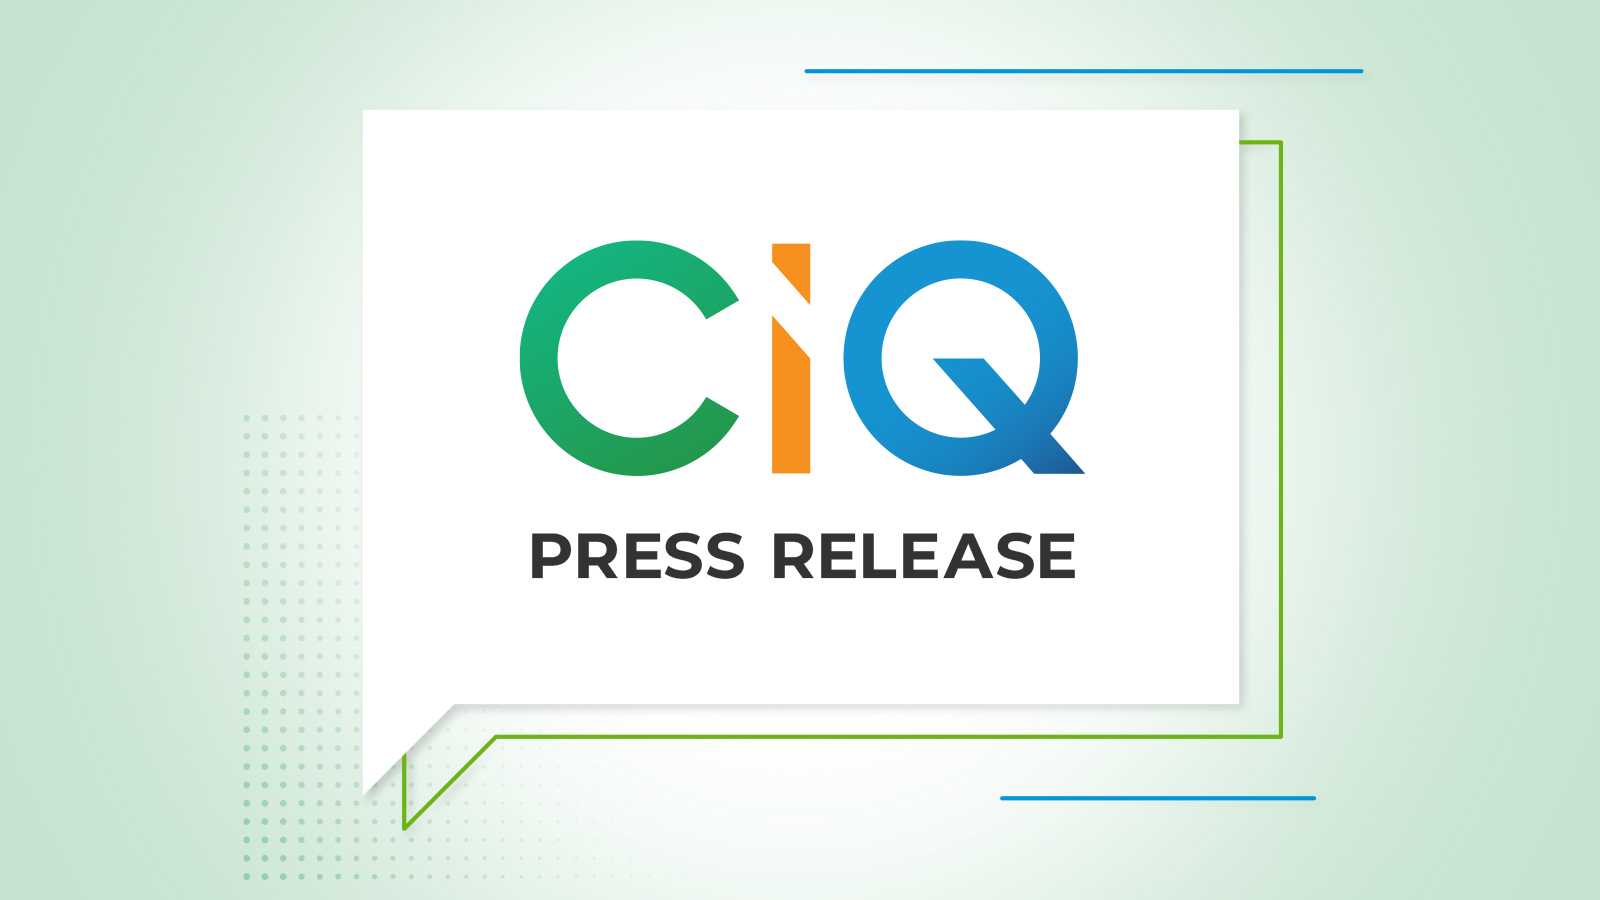 CIQ Expands Leadership Team, Naming 5 New Vice Presidents